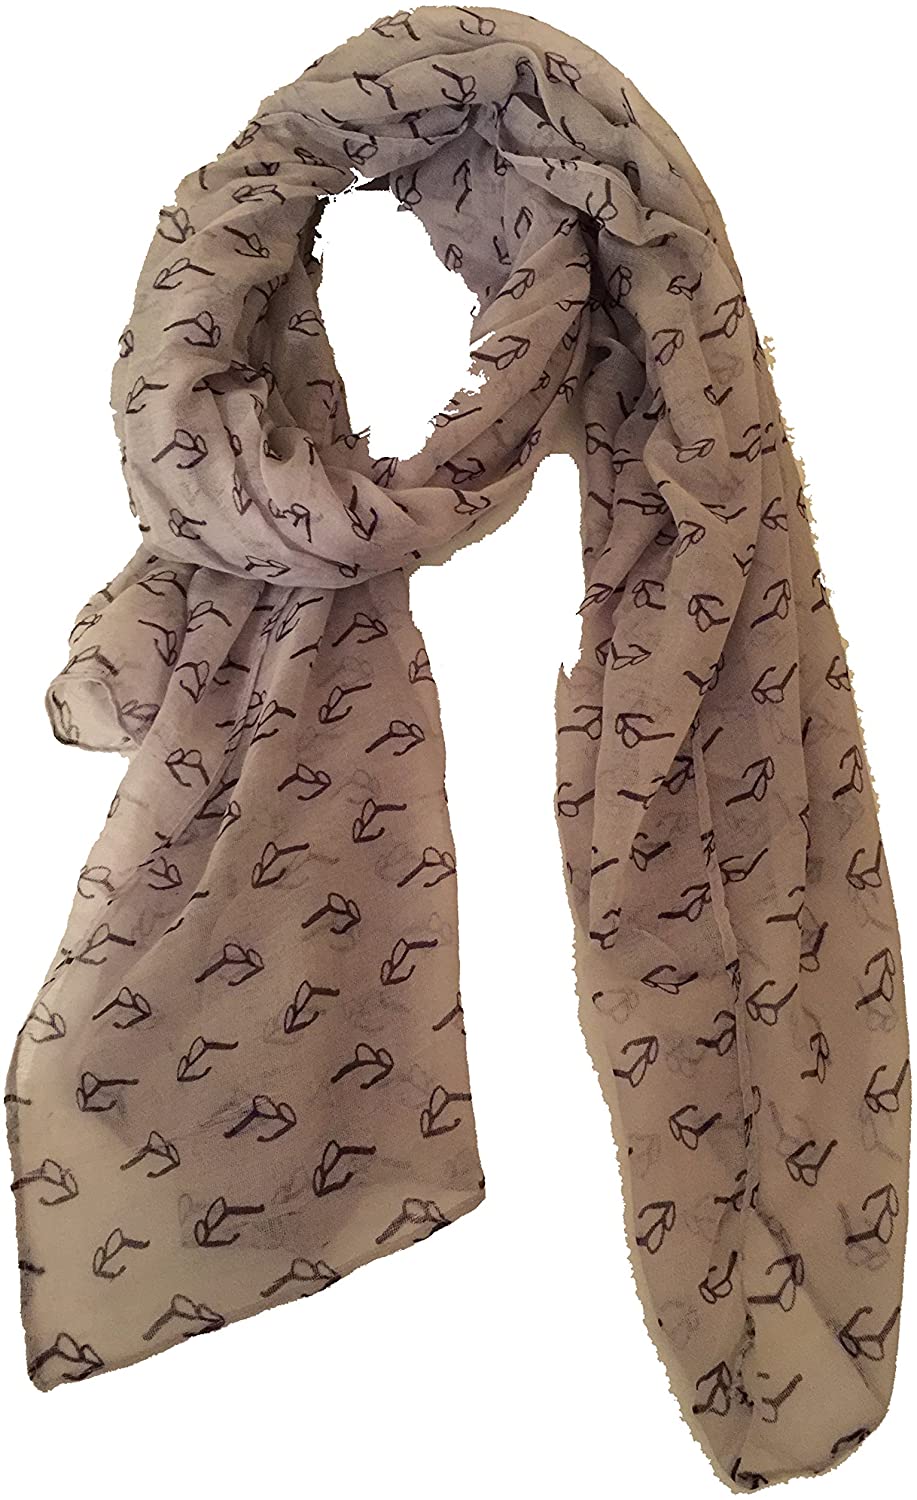 Pamper Yourself Now Grey with Black Glasses/Spectacles Design Long Scarf